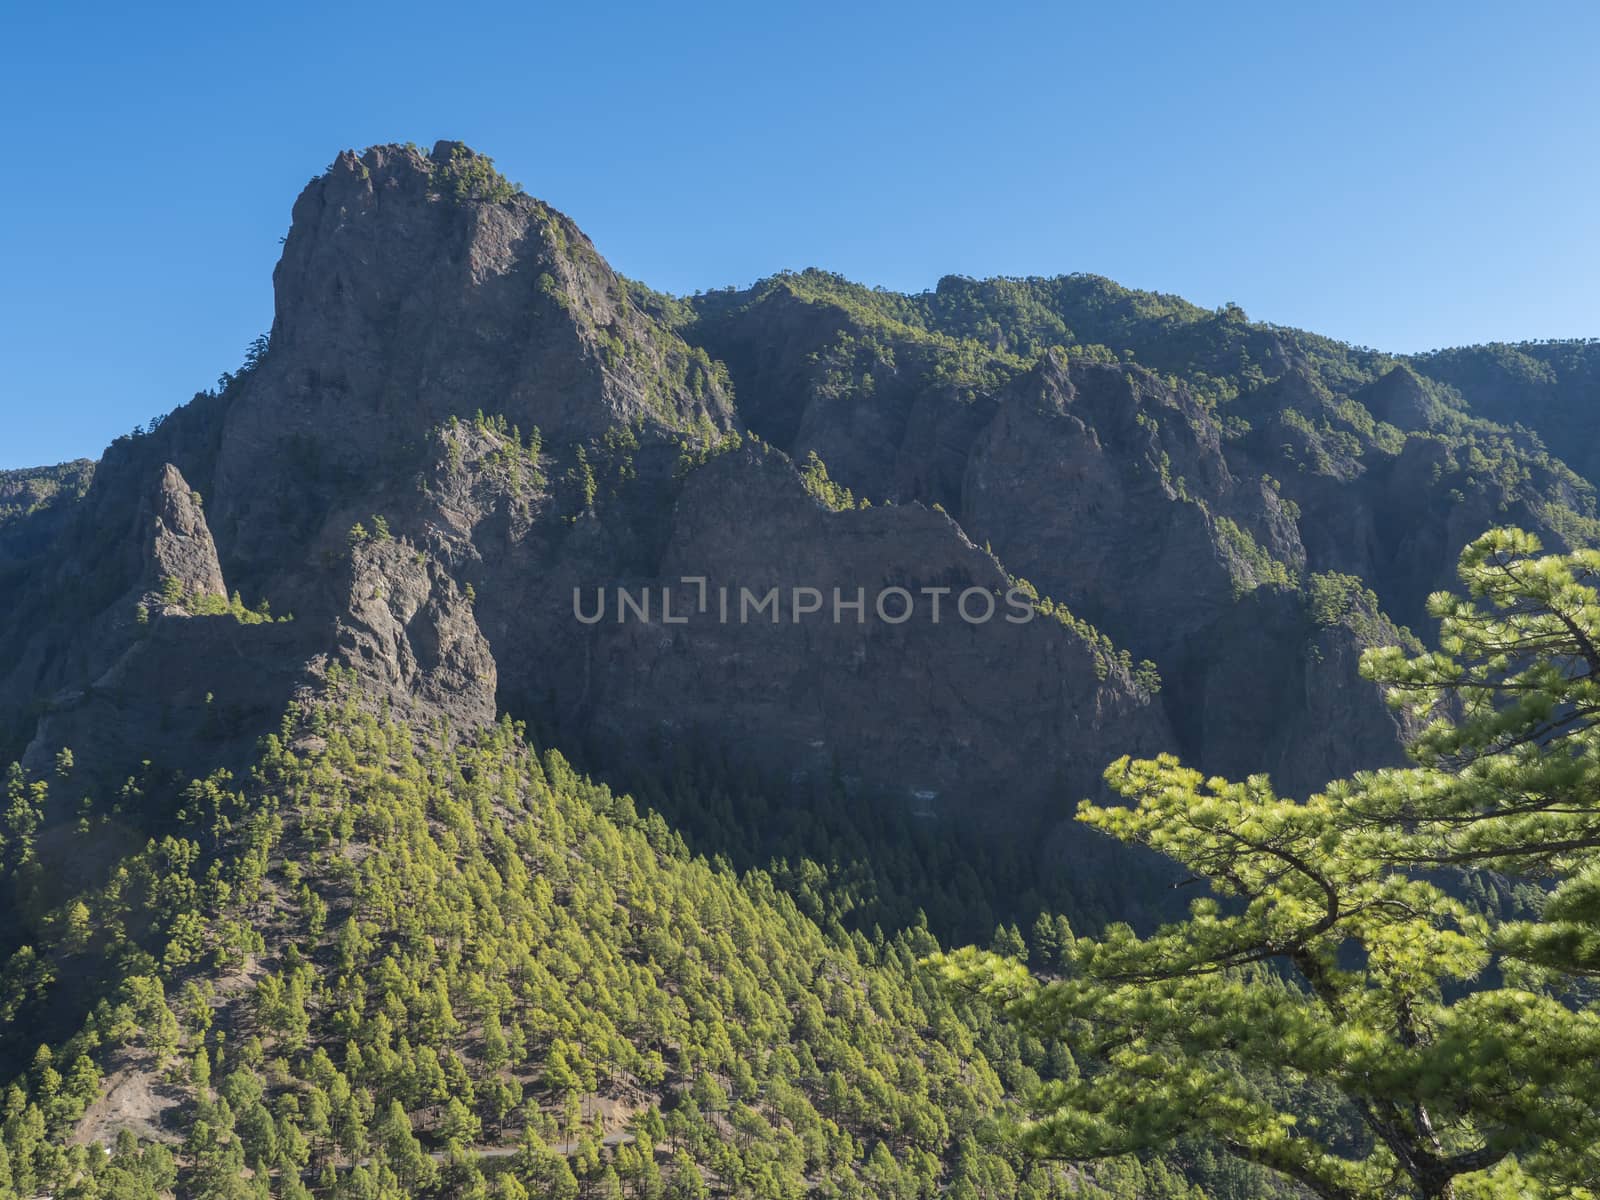 Volcanic landscape and lush pine tree forest, pinus canariensis view from Mirador de la Cumbrecita viewpoint at national park Caldera de Taburiente, volcanic crater in La Palma, Canary Islands, Spain by Henkeova